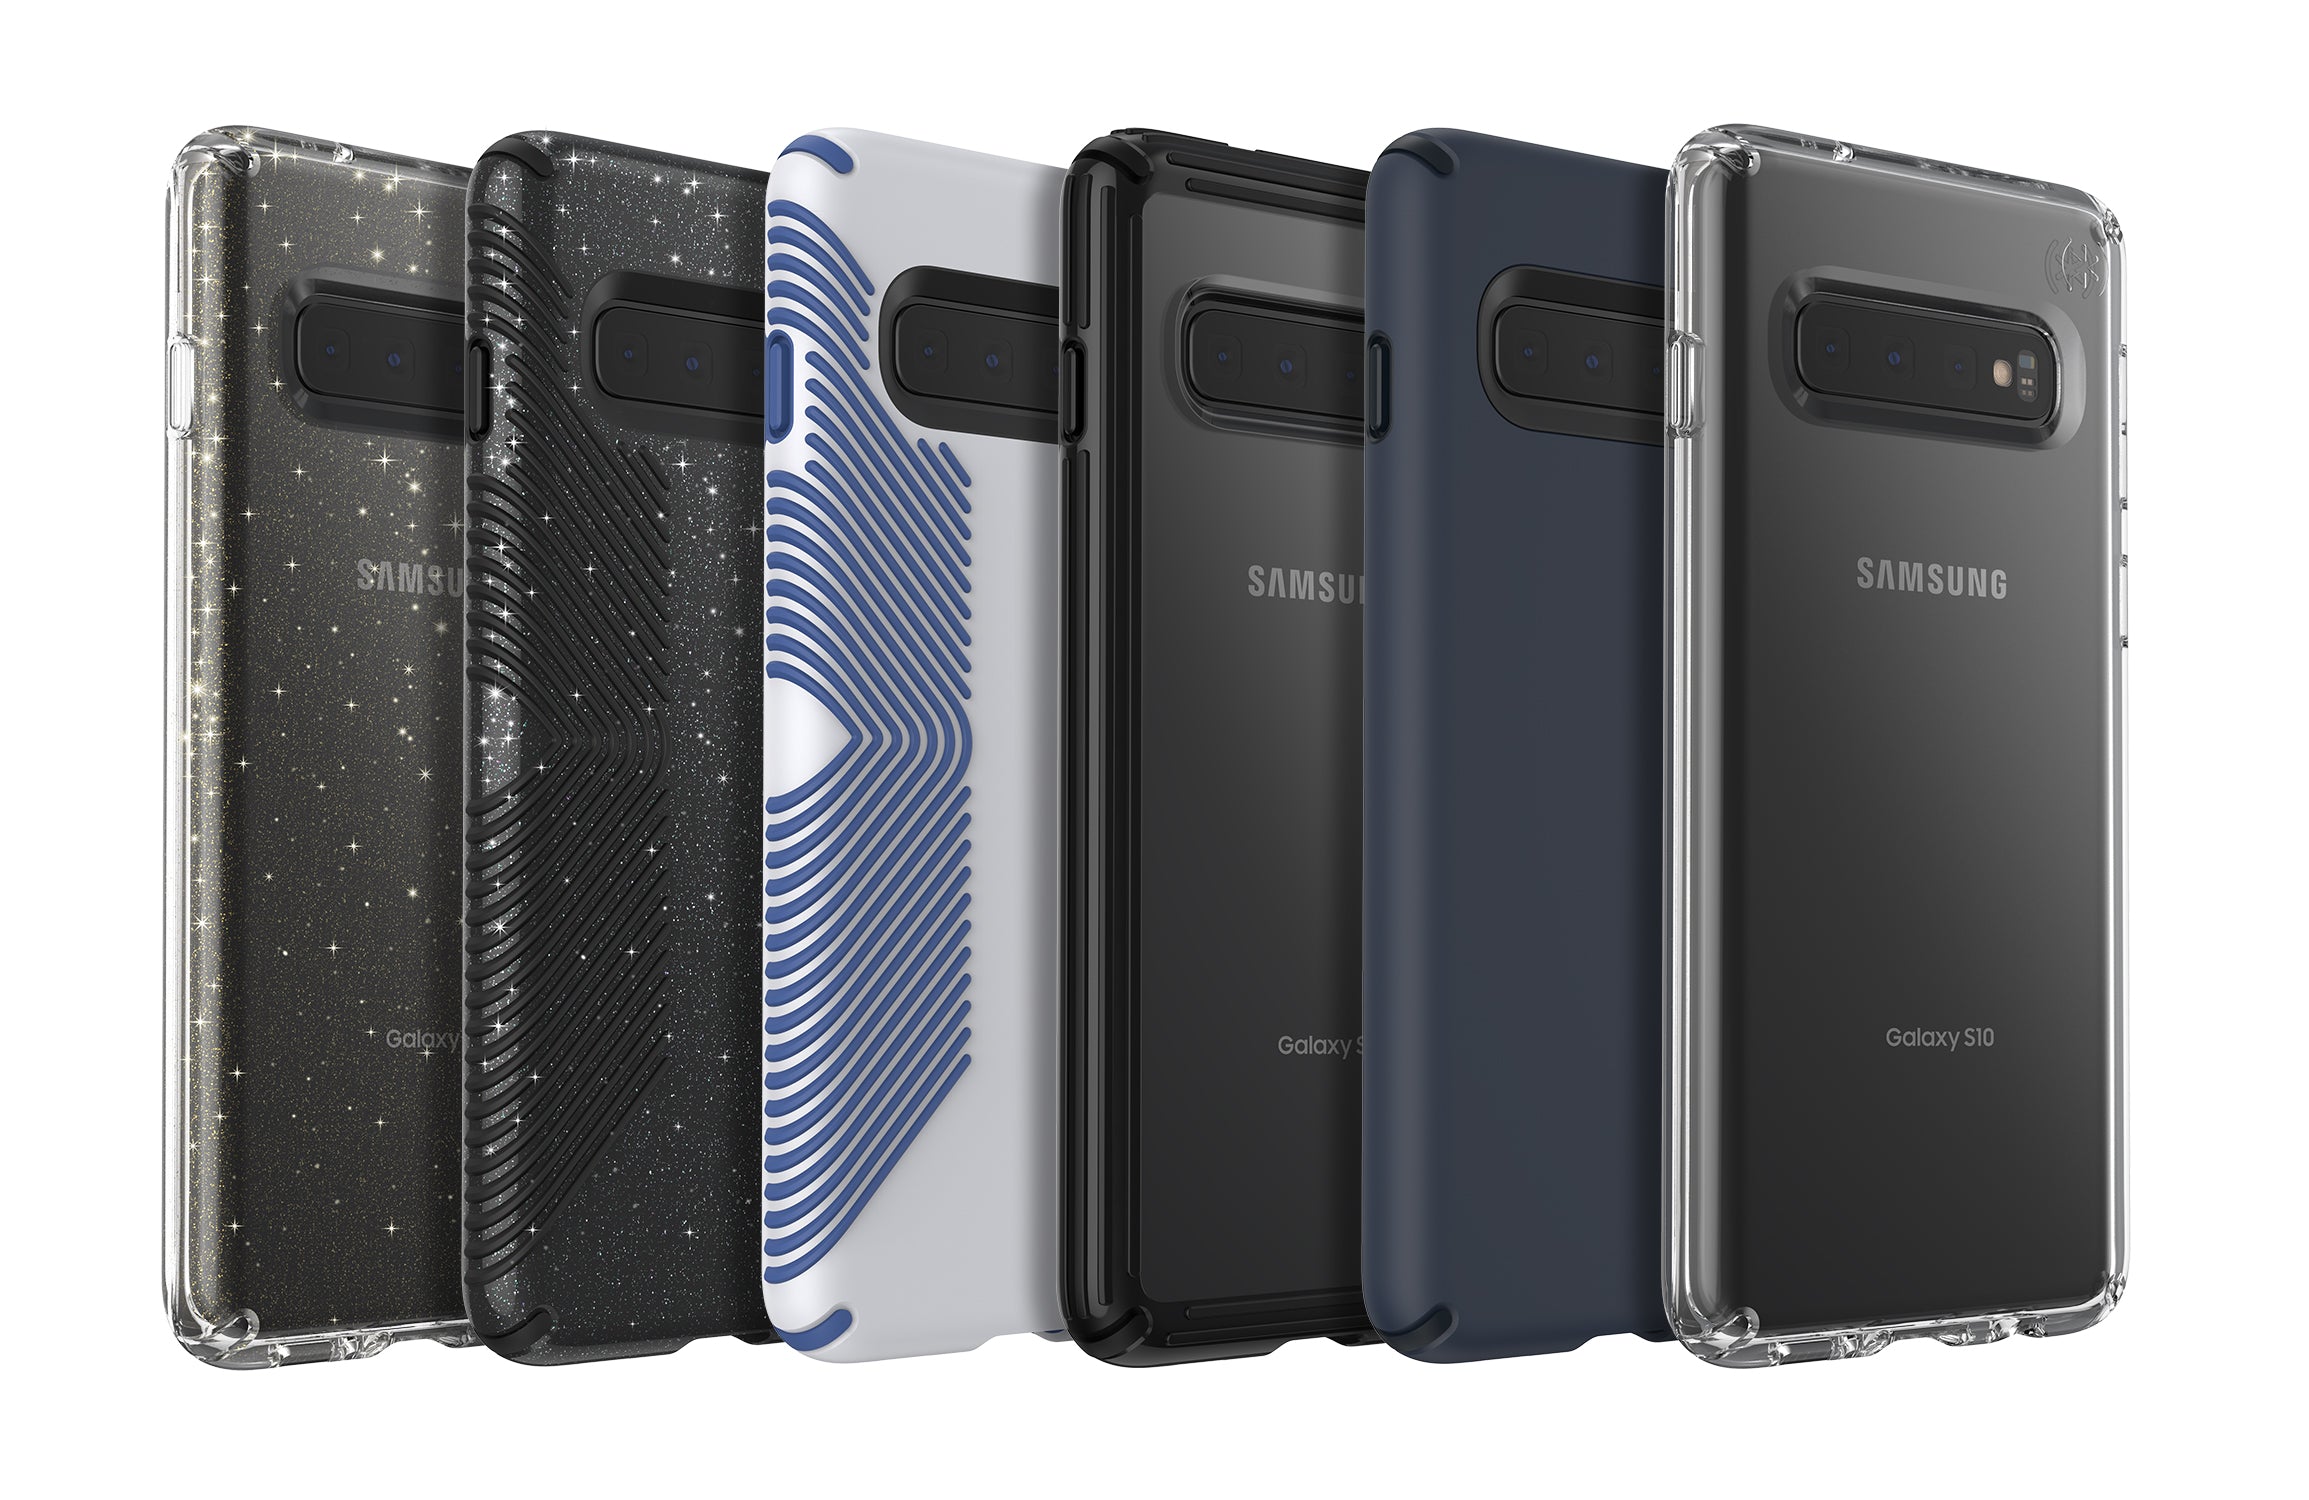 The New Samsung Galaxy S10 Lineup: 5 Game Changers For The S10, S10e, and S10+